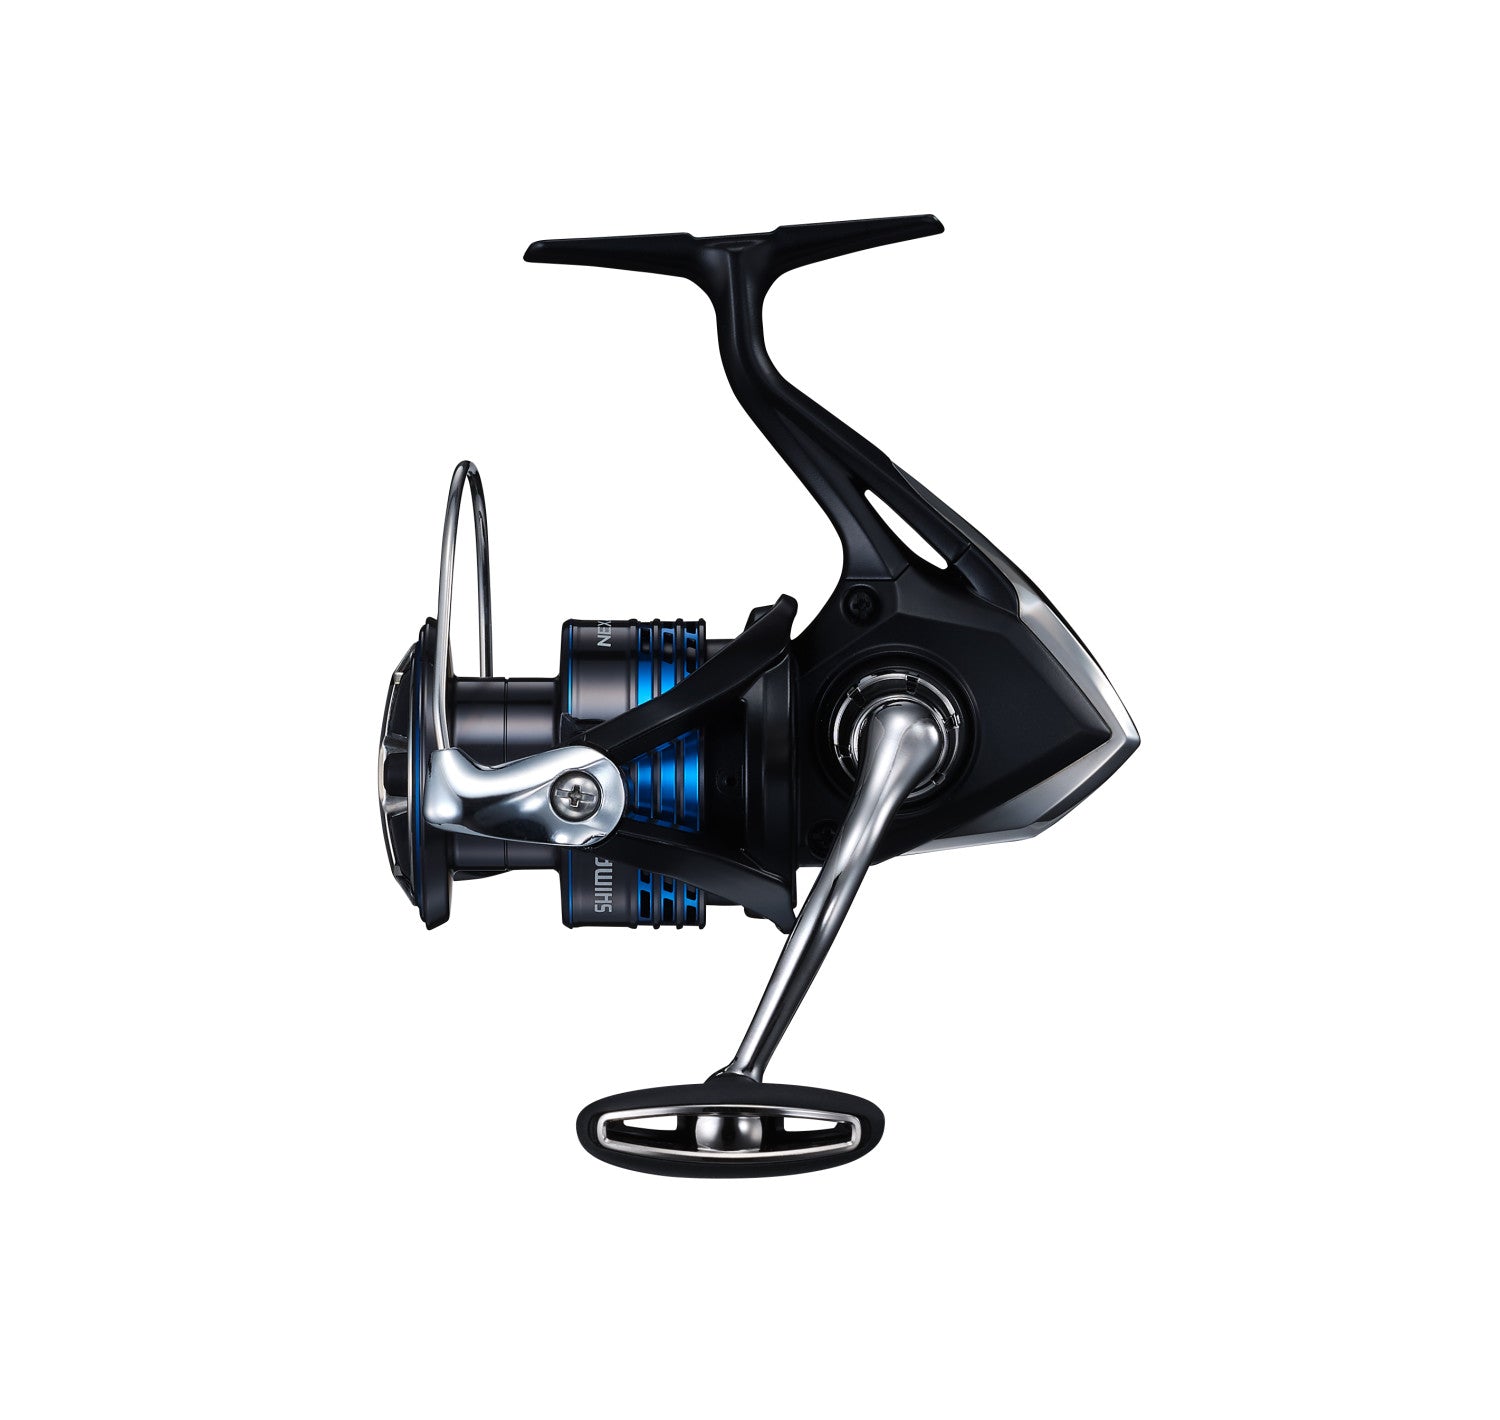 LIUTT High Speed Spinning Reels High Gear Ratio Spinning Reel 6.3:1 Metal  Arm Wire Spool Hollow Out Design Fishing Reel KY5000, Spinning Reels -   Canada